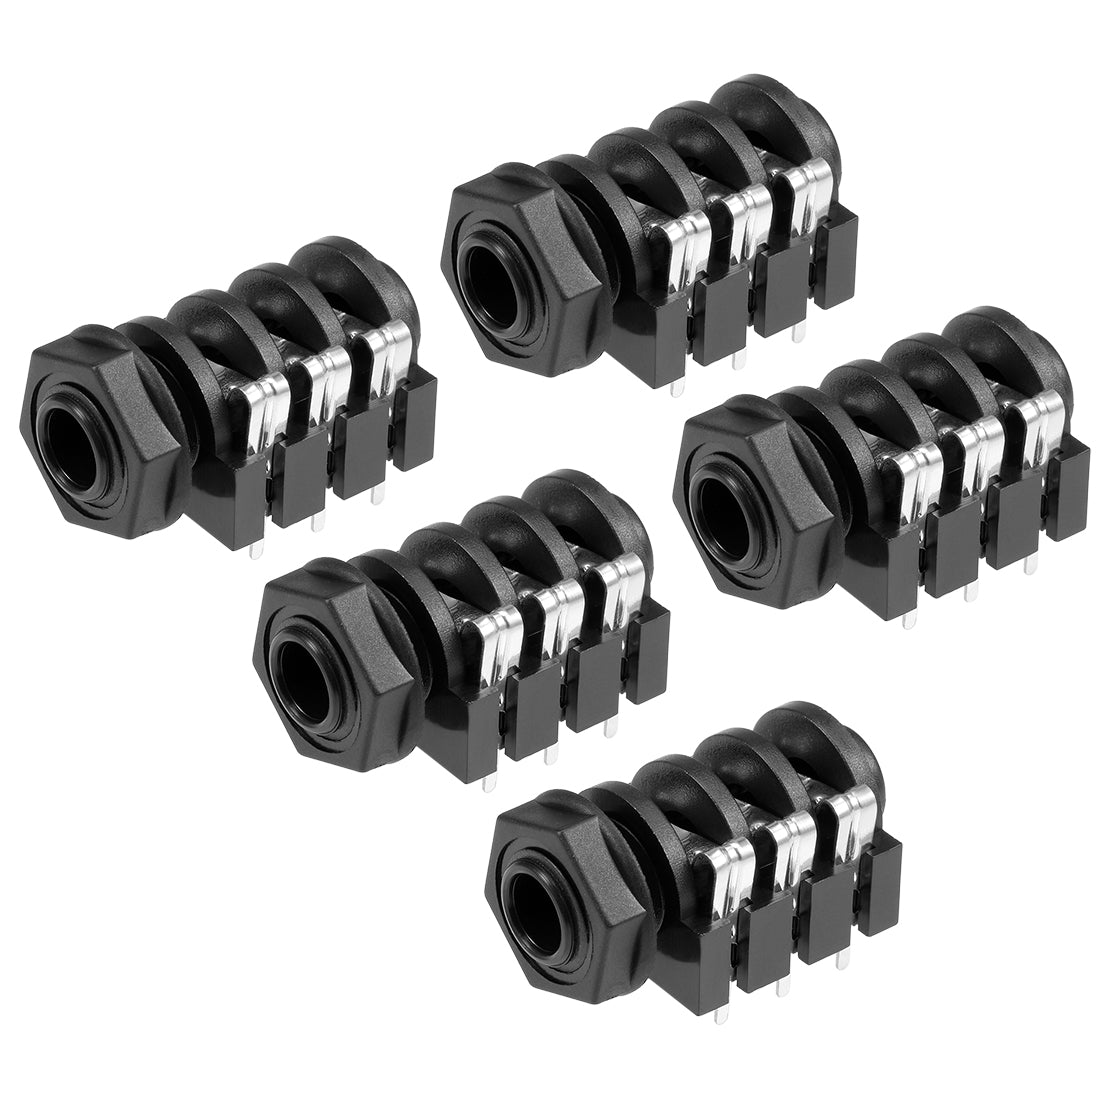 uxcell Uxcell PCB Mount 6.35mm 6 Pin Socket Headphone Stereo Jack Audio Video Connector Black 5Pcs